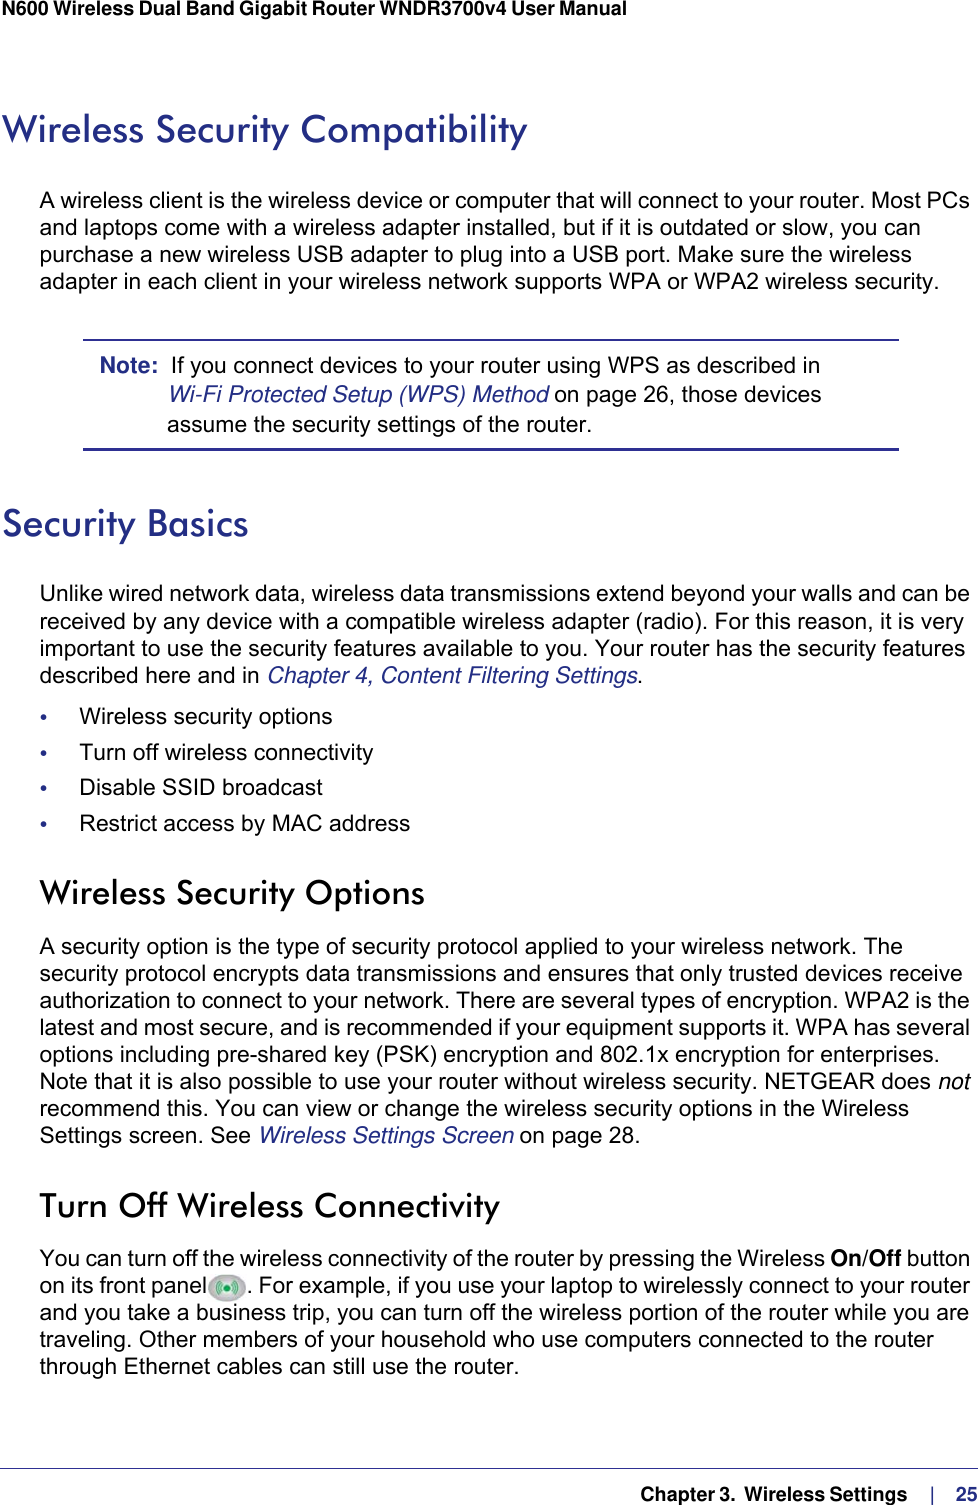   Chapter 3.  Wireless Settings     |    25N600 Wireless Dual Band Gigabit Router WNDR3700v4 User Manual Wireless Security CompatibilityA wireless client is the wireless device or computer that will connect to your router. Most PCs and laptops come with a wireless adapter installed, but if it is outdated or slow, you can purchase a new wireless USB adapter to plug into a USB port. Make sure the wireless adapter in each client in your wireless network supports WPA or WPA2 wireless security. Note:  If you connect devices to your router using WPS as described in Wi-Fi Protected Setup (WPS) Method on page  26, those devices assume the security settings of the router.Security BasicsUnlike wired network data, wireless data transmissions extend beyond your walls and can be received by any device with a compatible wireless adapter (radio). For this reason, it is very important to use the security features available to you. Your router has the security features described here and in Chapter 4, Content Filtering Settings.•     Wireless security options•     Turn off wireless connectivity•     Disable SSID broadcast•     Restrict access by MAC addressWireless Security OptionsA security option is the type of security protocol applied to your wireless network. The security protocol encrypts data transmissions and ensures that only trusted devices receive authorization to connect to your network. There are several types of encryption. WPA2 is the latest and most secure, and is recommended if your equipment supports it. WPA has several options including pre-shared key (PSK) encryption and 802.1x encryption for enterprises. Note that it is also possible to use your router without wireless security. NETGEAR does not recommend this. You can view or change the wireless security options in the Wireless Settings screen. See Wireless Settings Screen on page  28.Turn Off Wireless ConnectivityYou can turn off the wireless connectivity of the router by pressing the Wireless On/Off button on its front panel . For example, if you use your laptop to wirelessly connect to your router and you take a business trip, you can turn off the wireless portion of the router while you are traveling. Other members of your household who use computers connected to the router through Ethernet cables can still use the router.